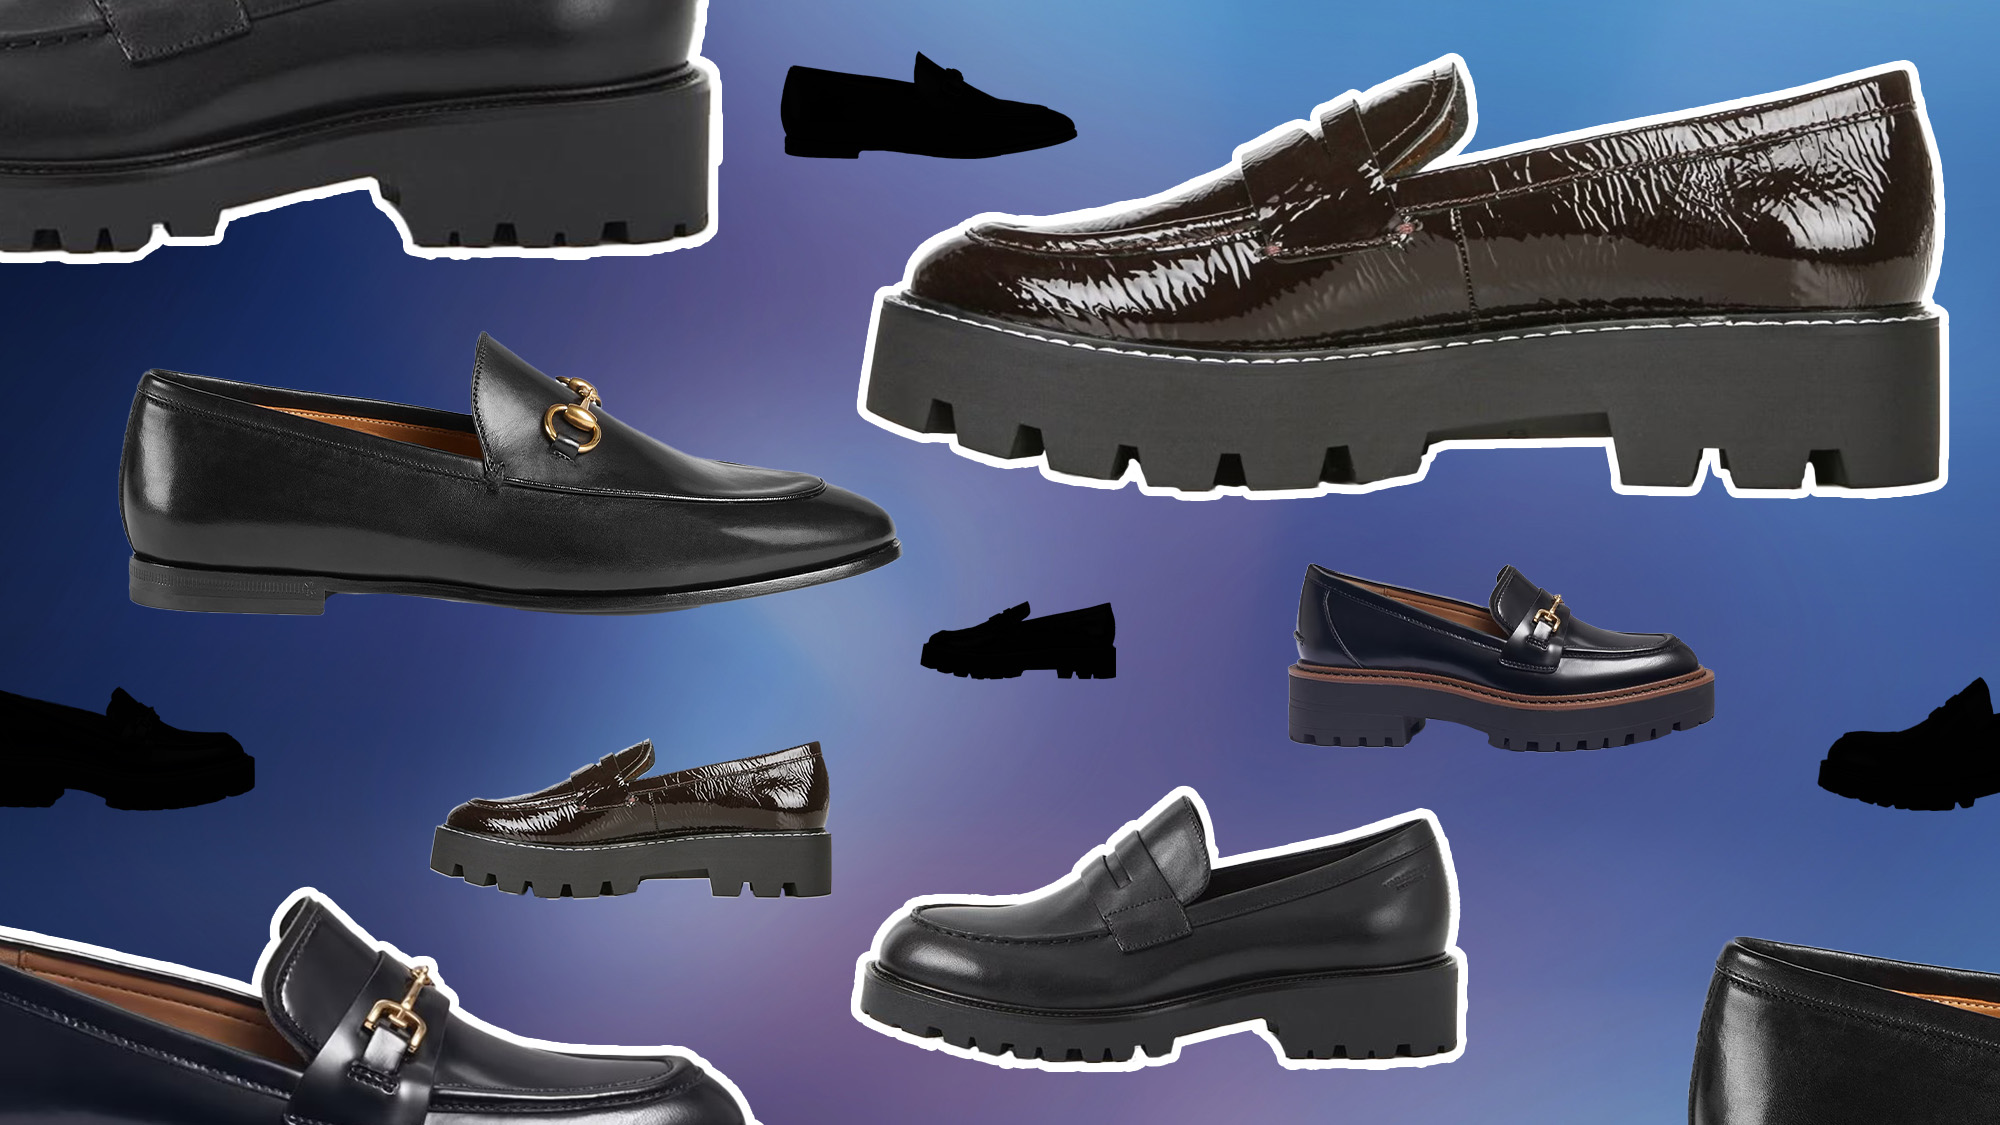 Academy Loafer - Luxury Loafers and Ballerinas - Shoes